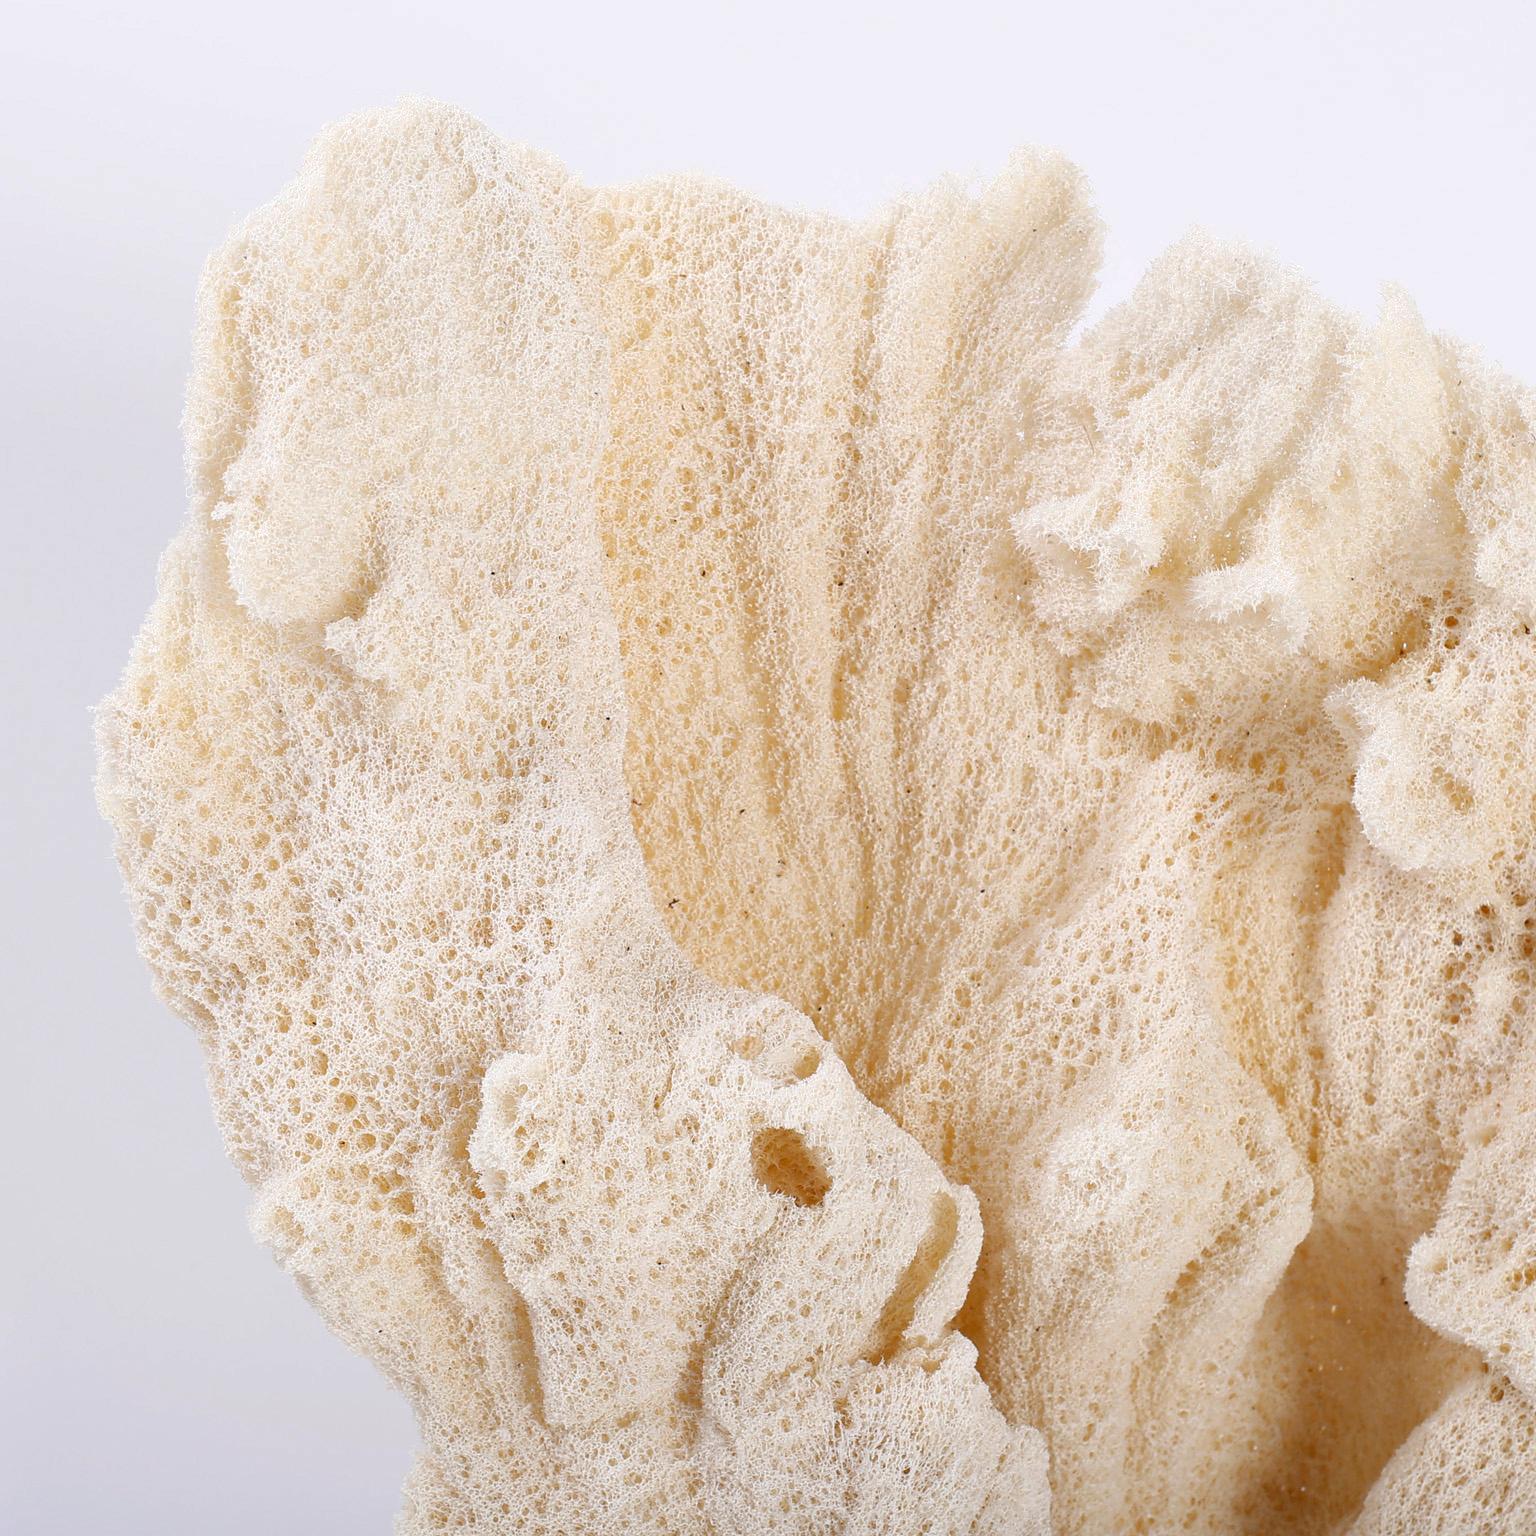 Striking sea sponge specimen with a dramatic form, sea inspired texture and soothing organic color. Presented on a Lucite base to enhance the sculptural elements.